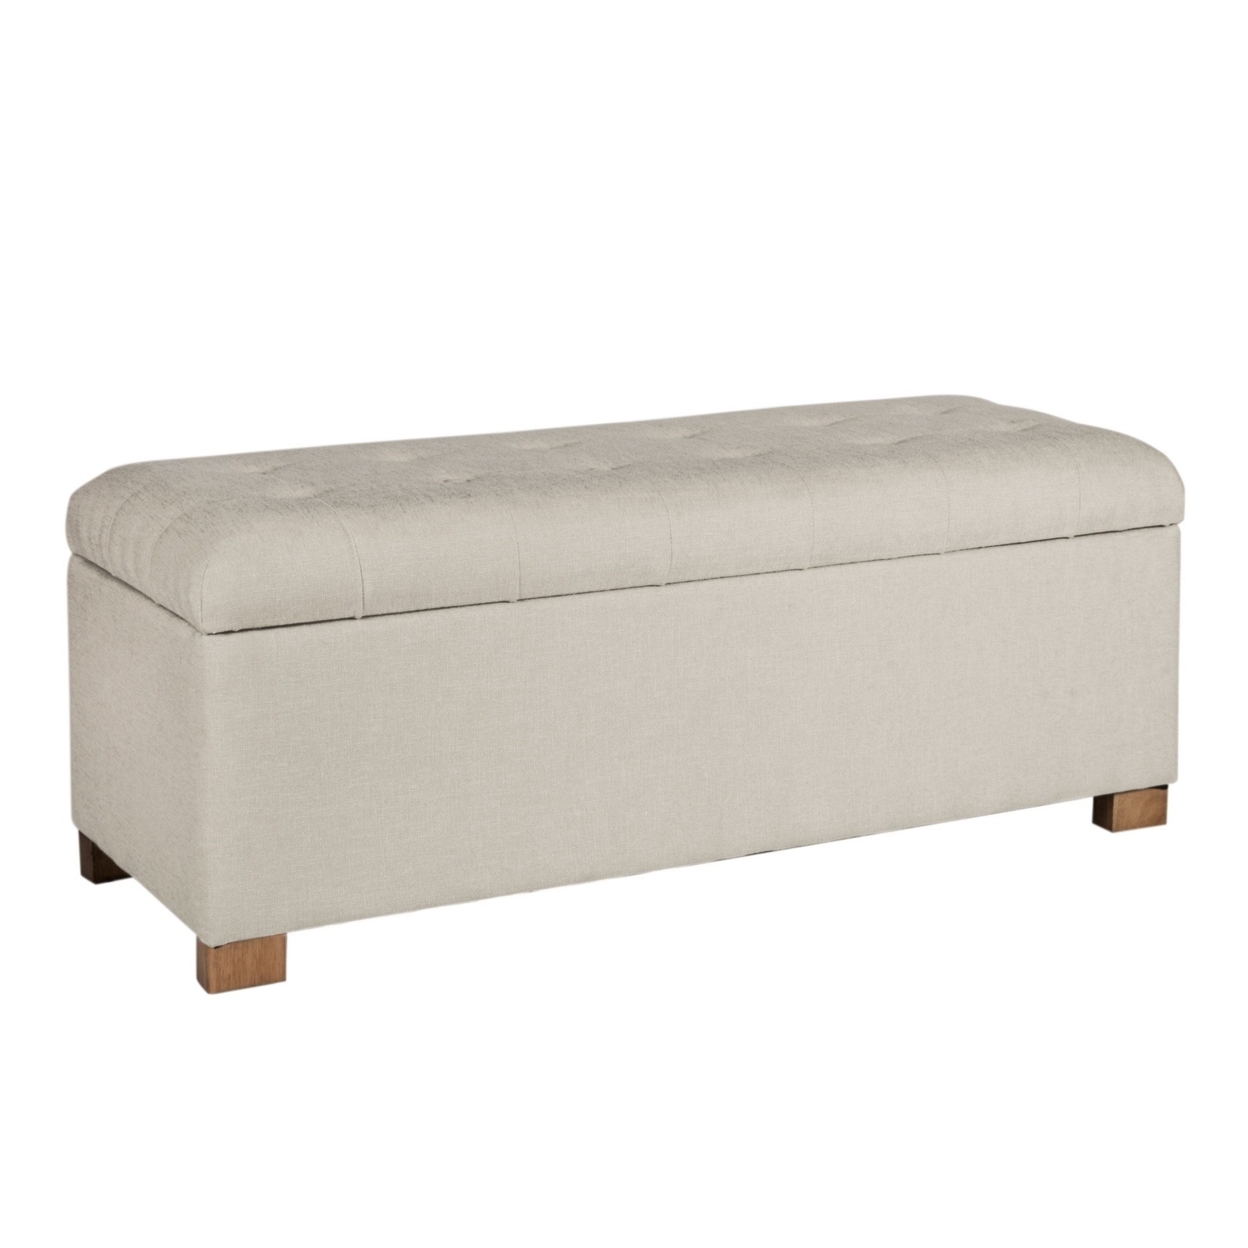 Polyester Upholstery Bench With Button Tufted Hinged Lid Storage And Wood Feet, Large, Light Gray- Saltoro Sherpi